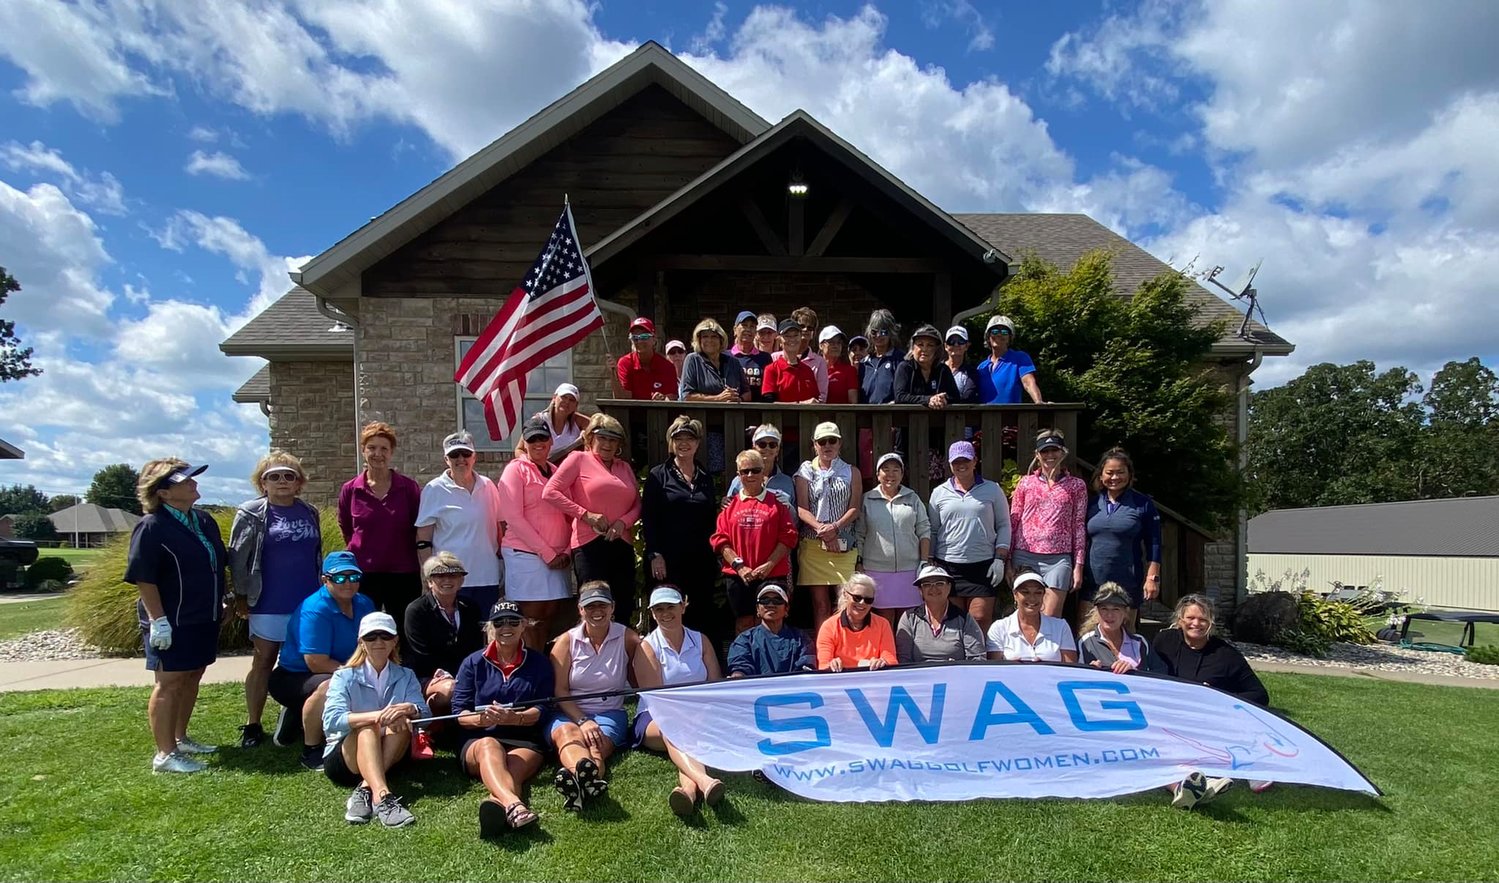 An incredible group of 40 women attended the golf event at Whispering Oaks on Sunday, Sept. 11, hosted by SWAG. Together they raised a little over $1,600, with all proceeds going towards Safe Harbor efforts to make a safe palace for abuse victims.